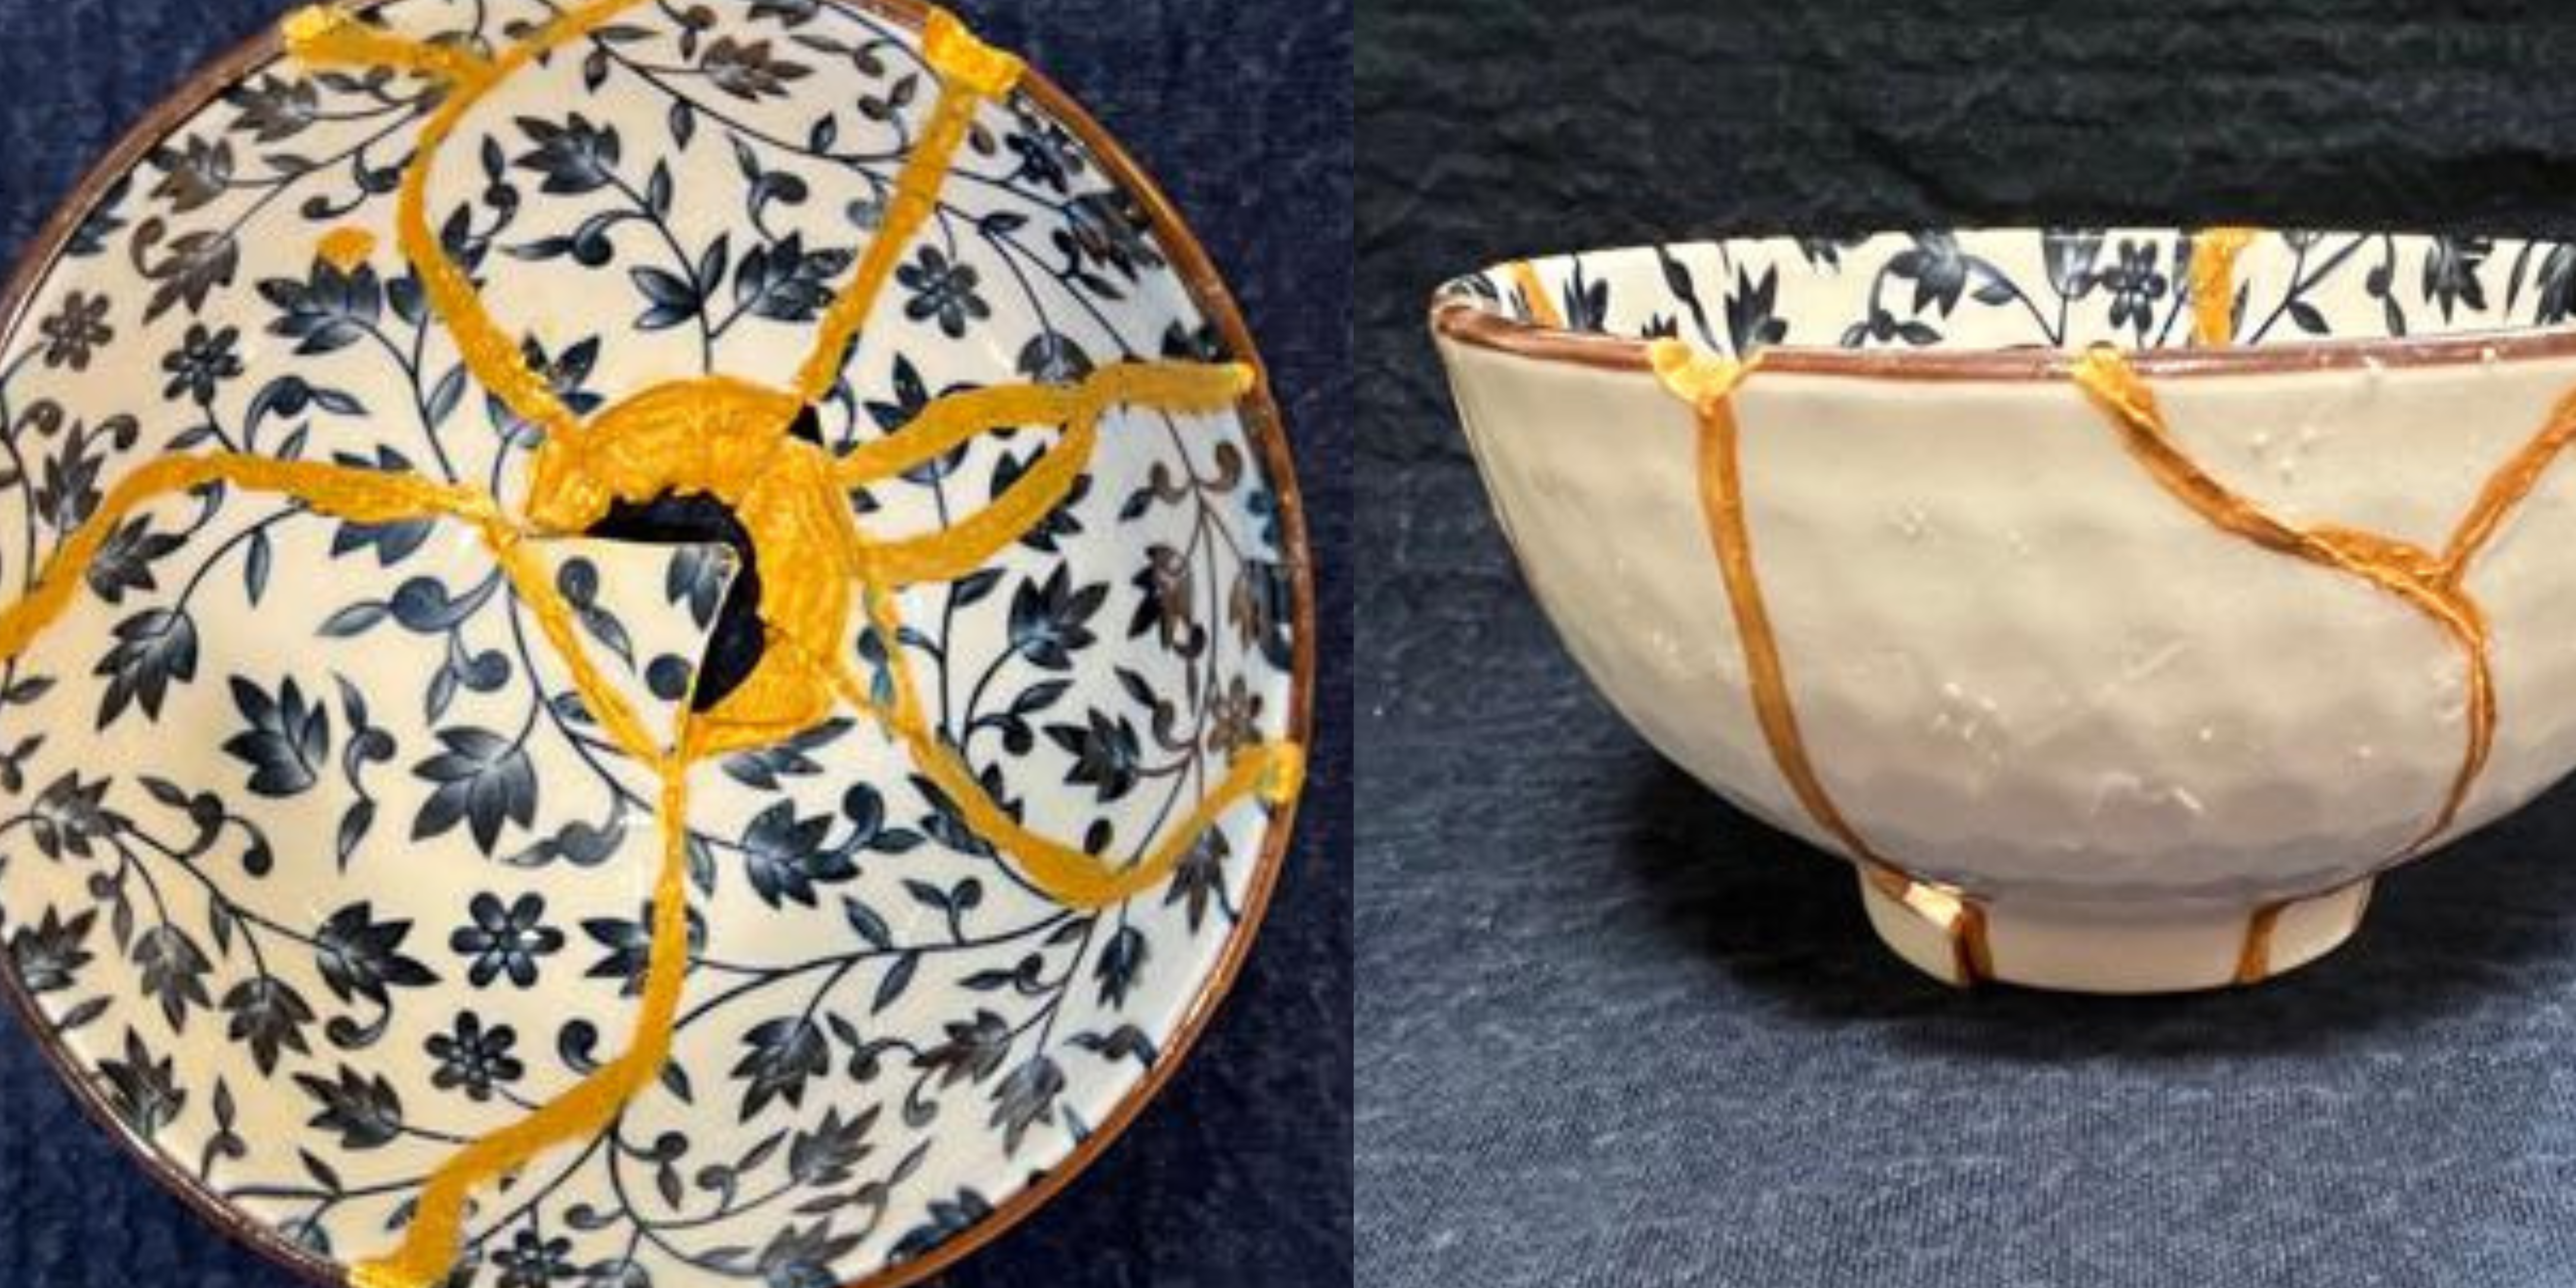 Kintsugi pottery broken and repaired with gold